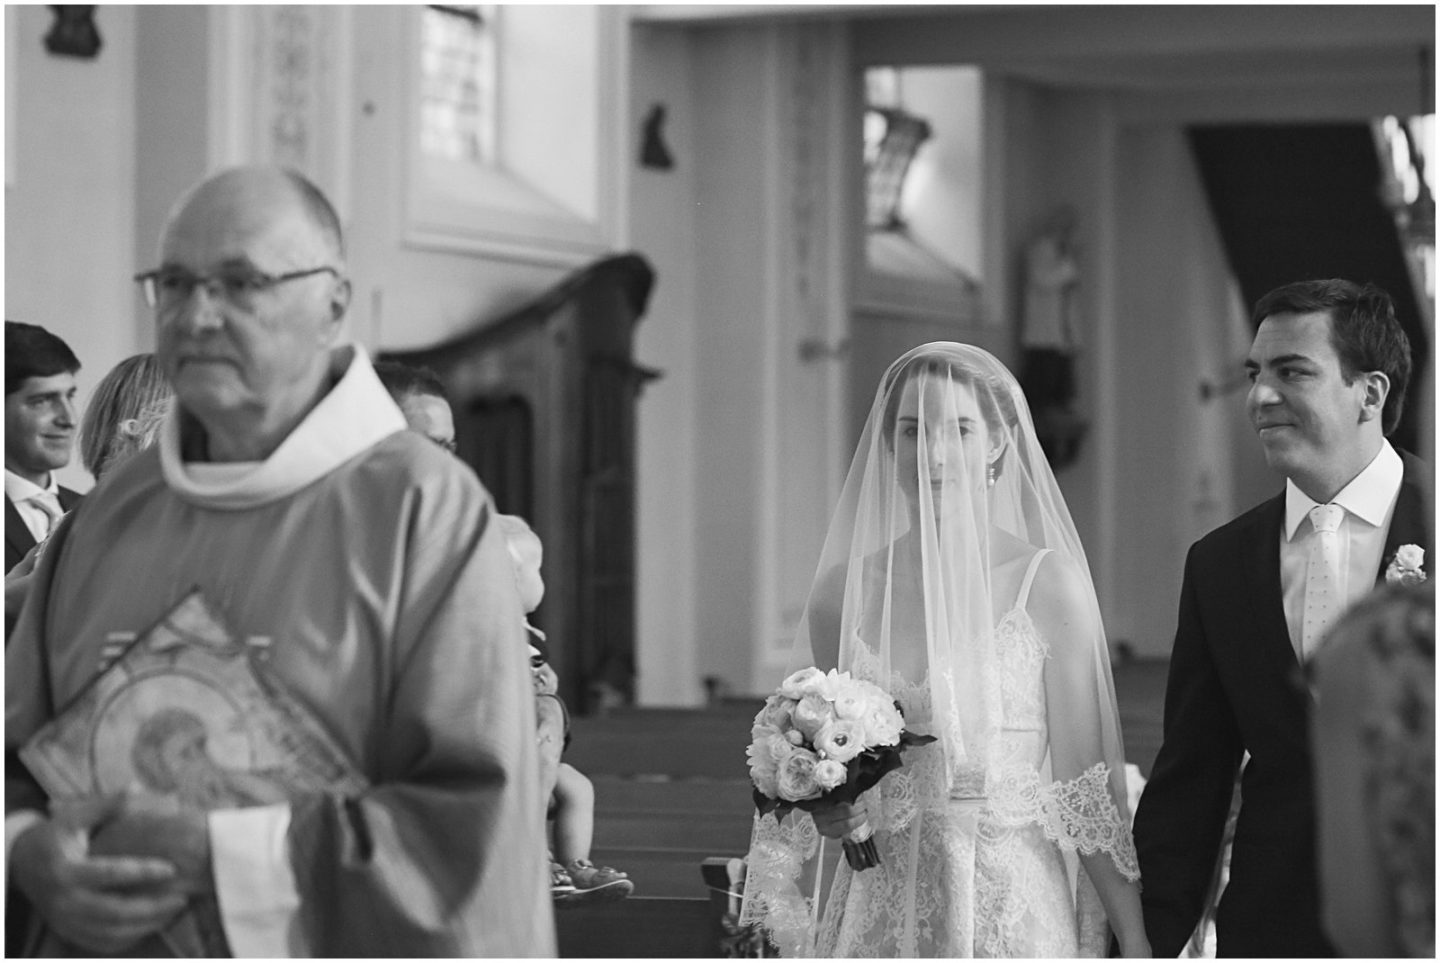 classic church wedding in alsace france by photographer Helena Woods